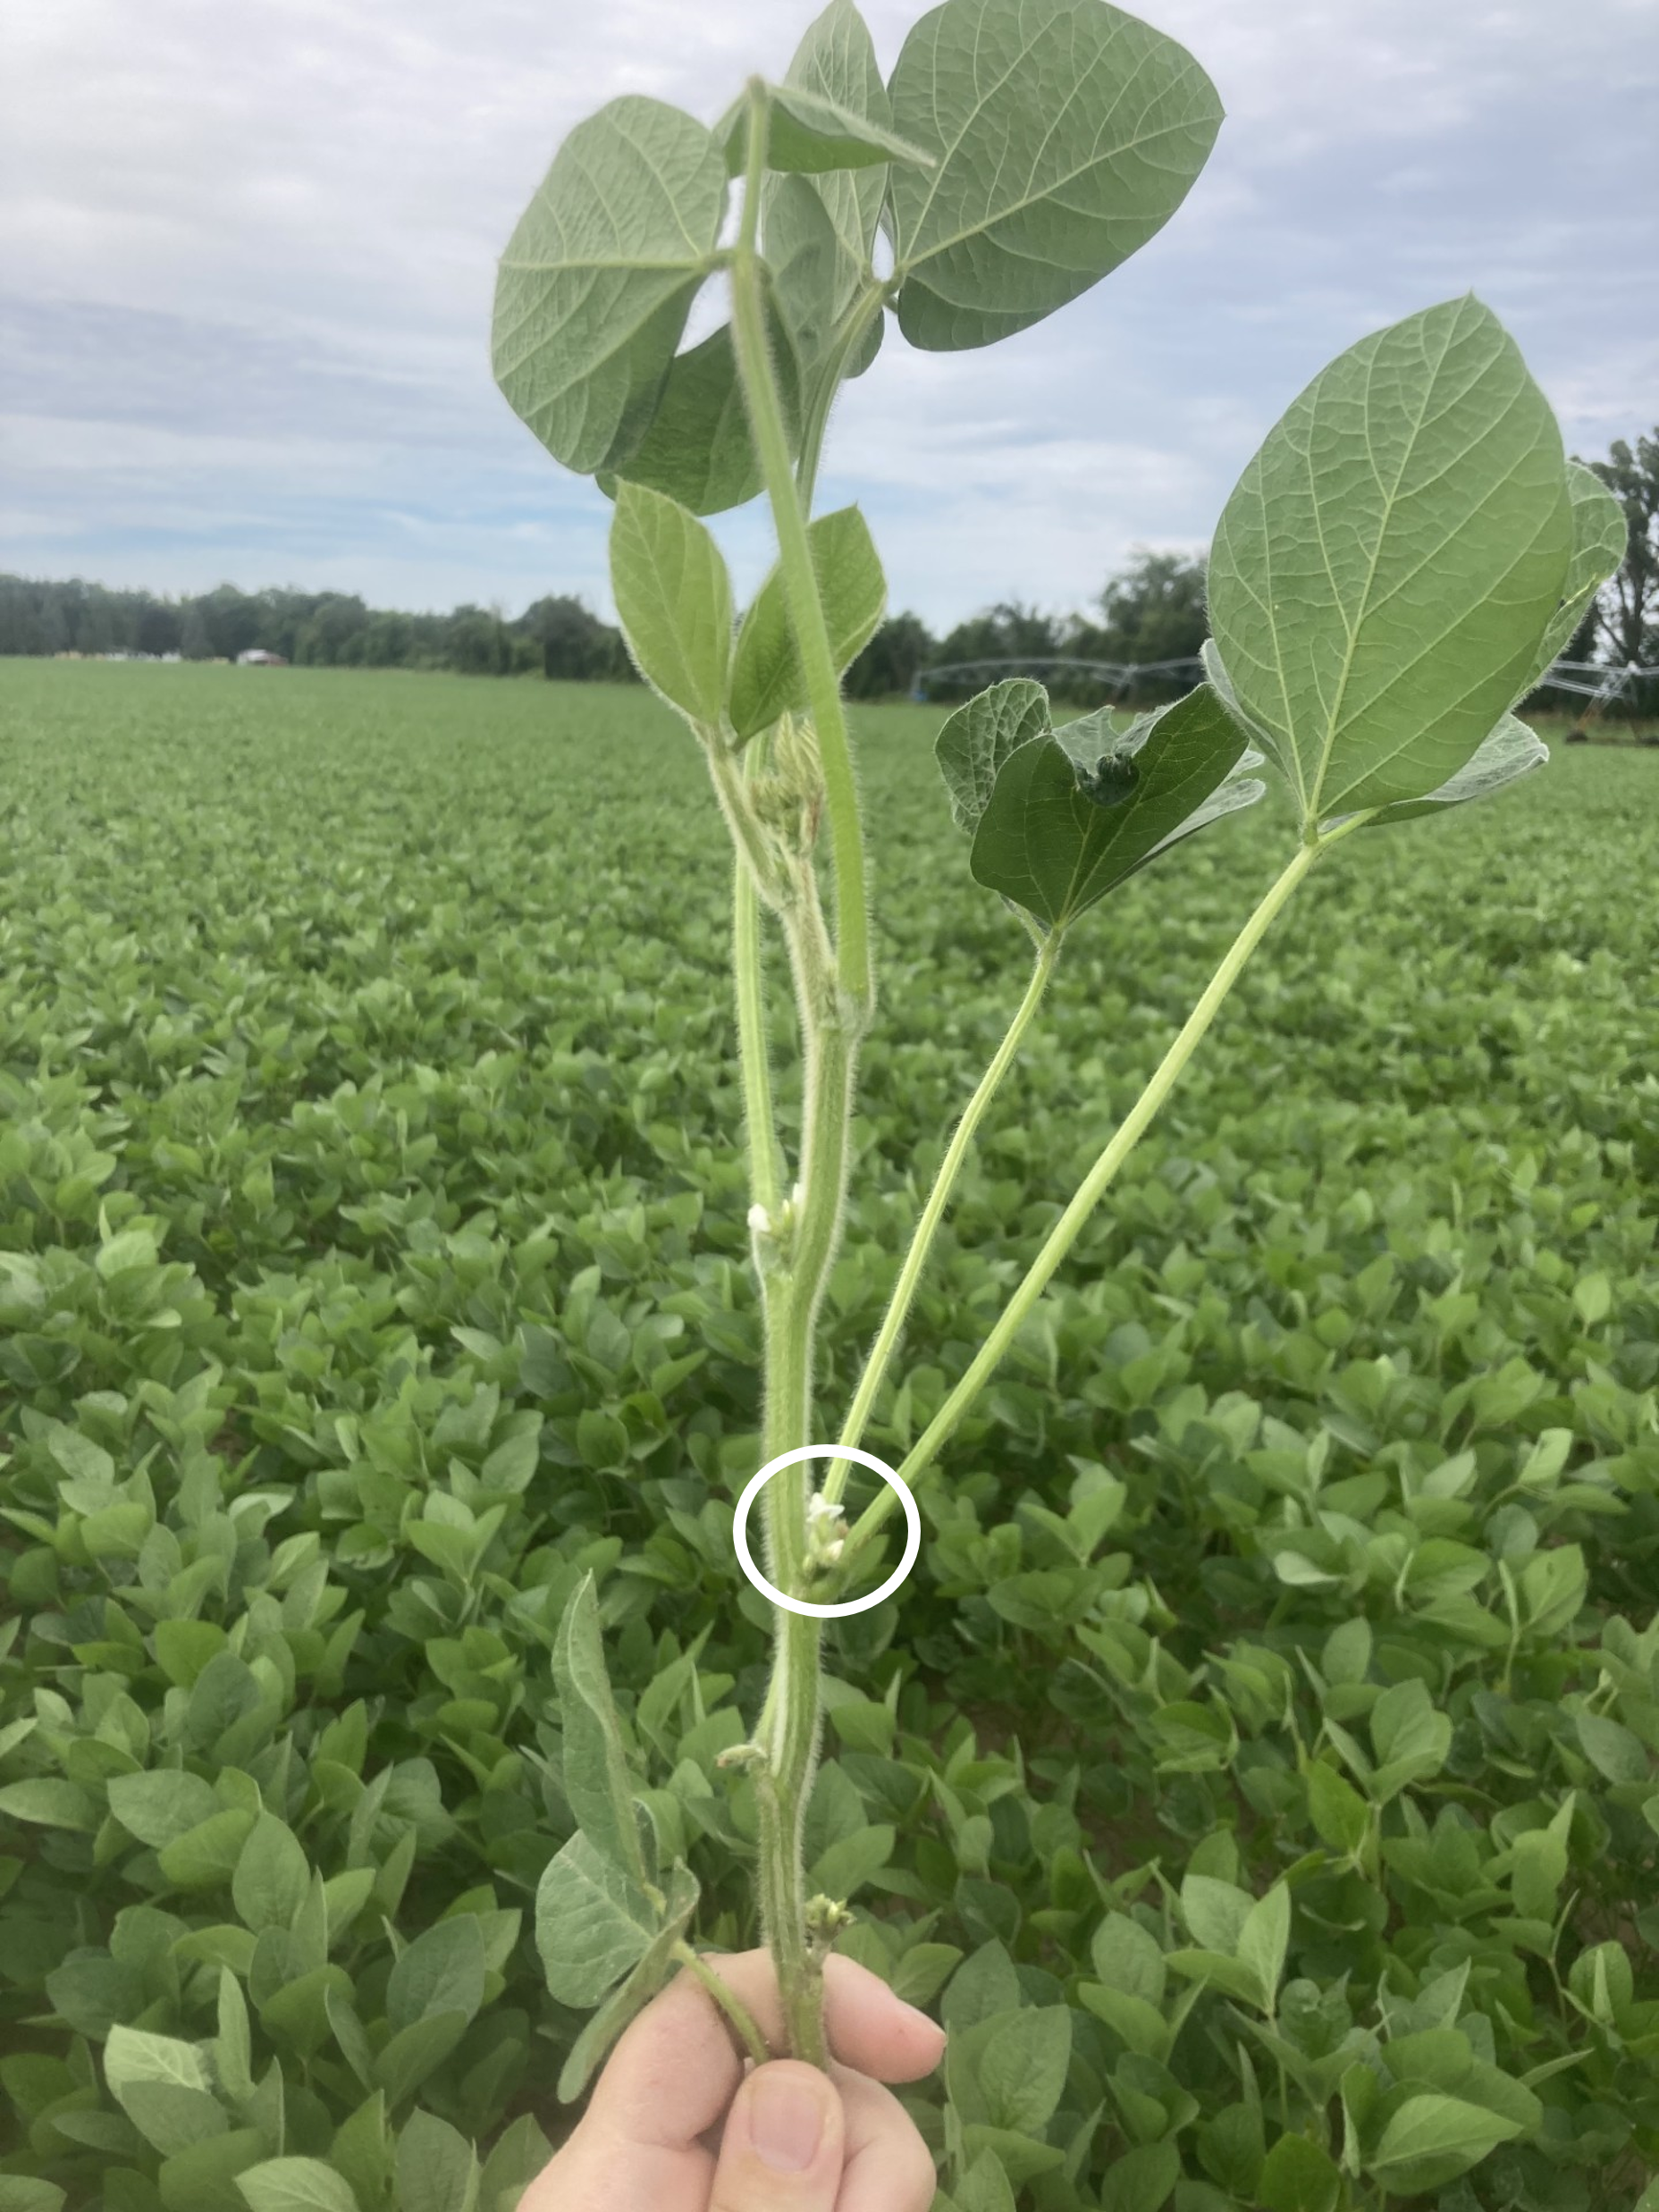 Soybean plant with a white circle around an open flower.